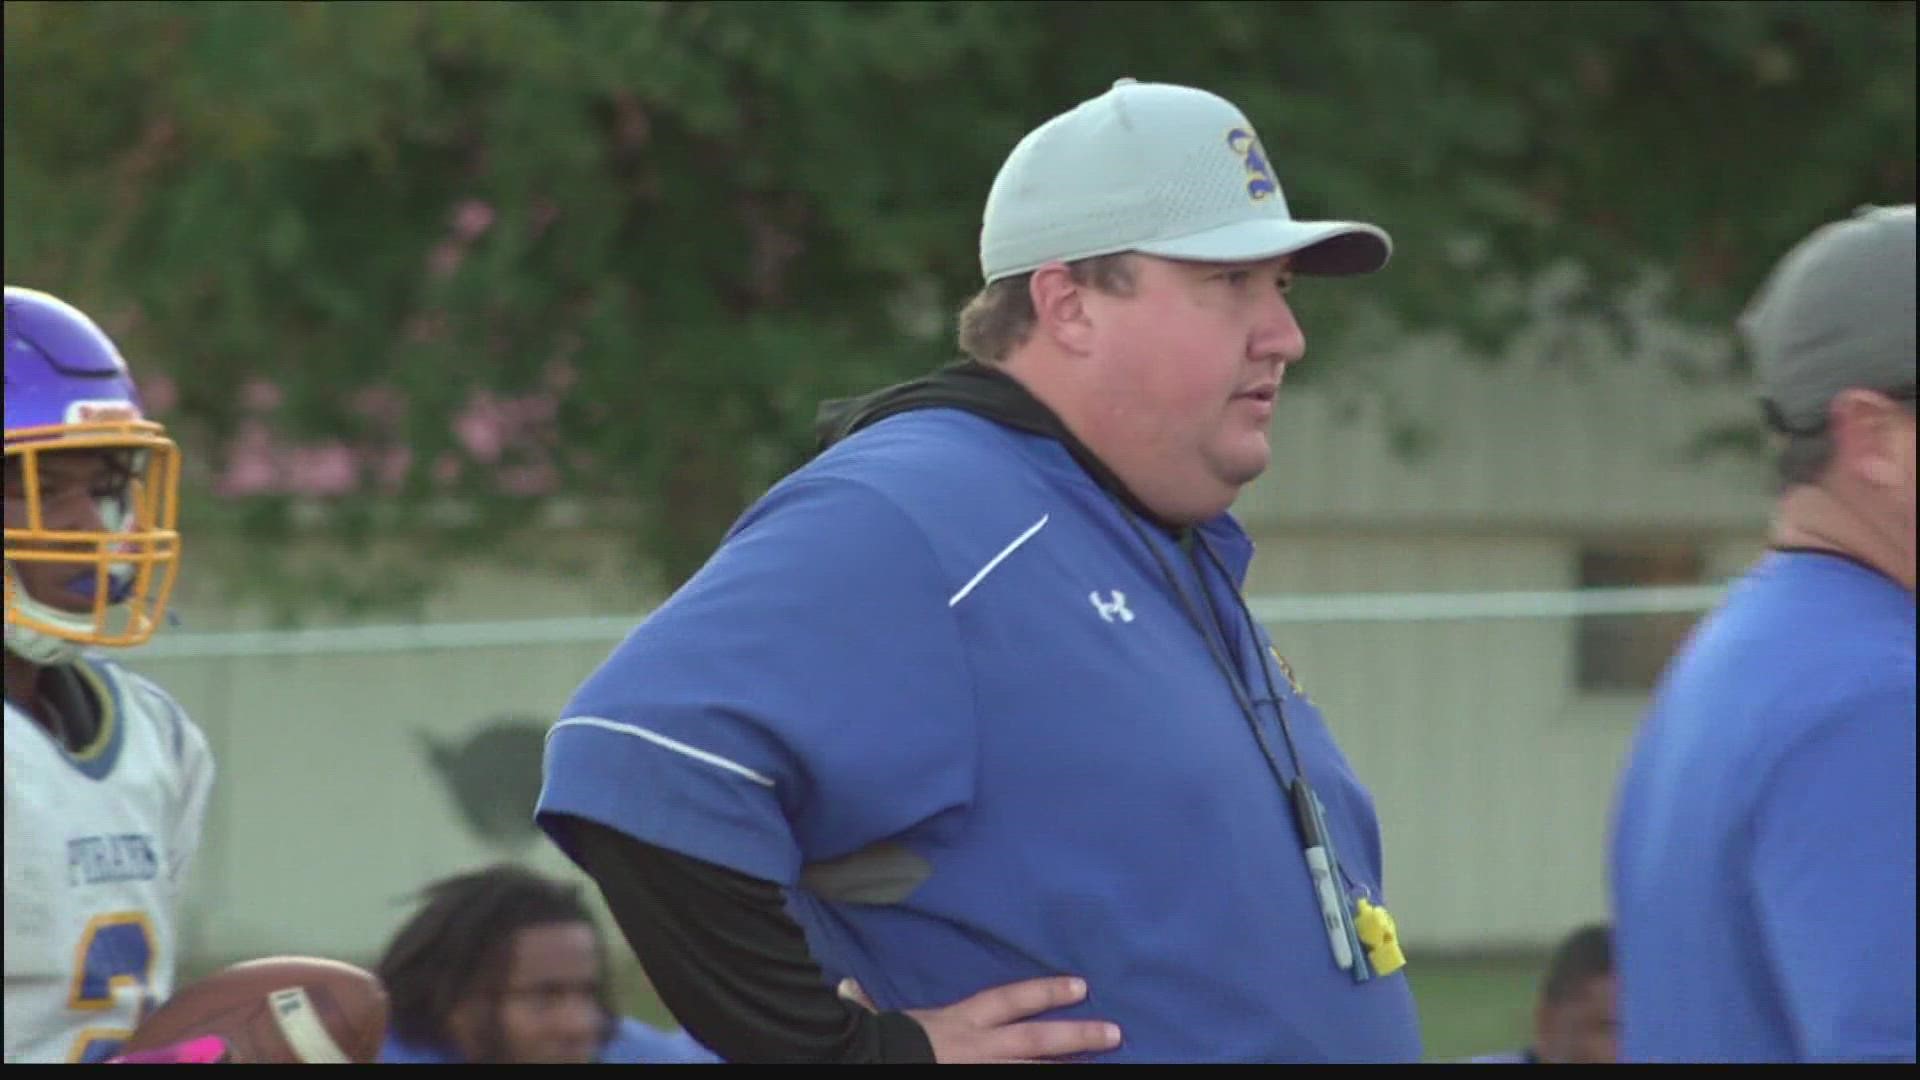 Grady has been the offensive coordinator at Brunswick for the last five years. He's motivated to get the Pirates past the second round of the playoffs this year.